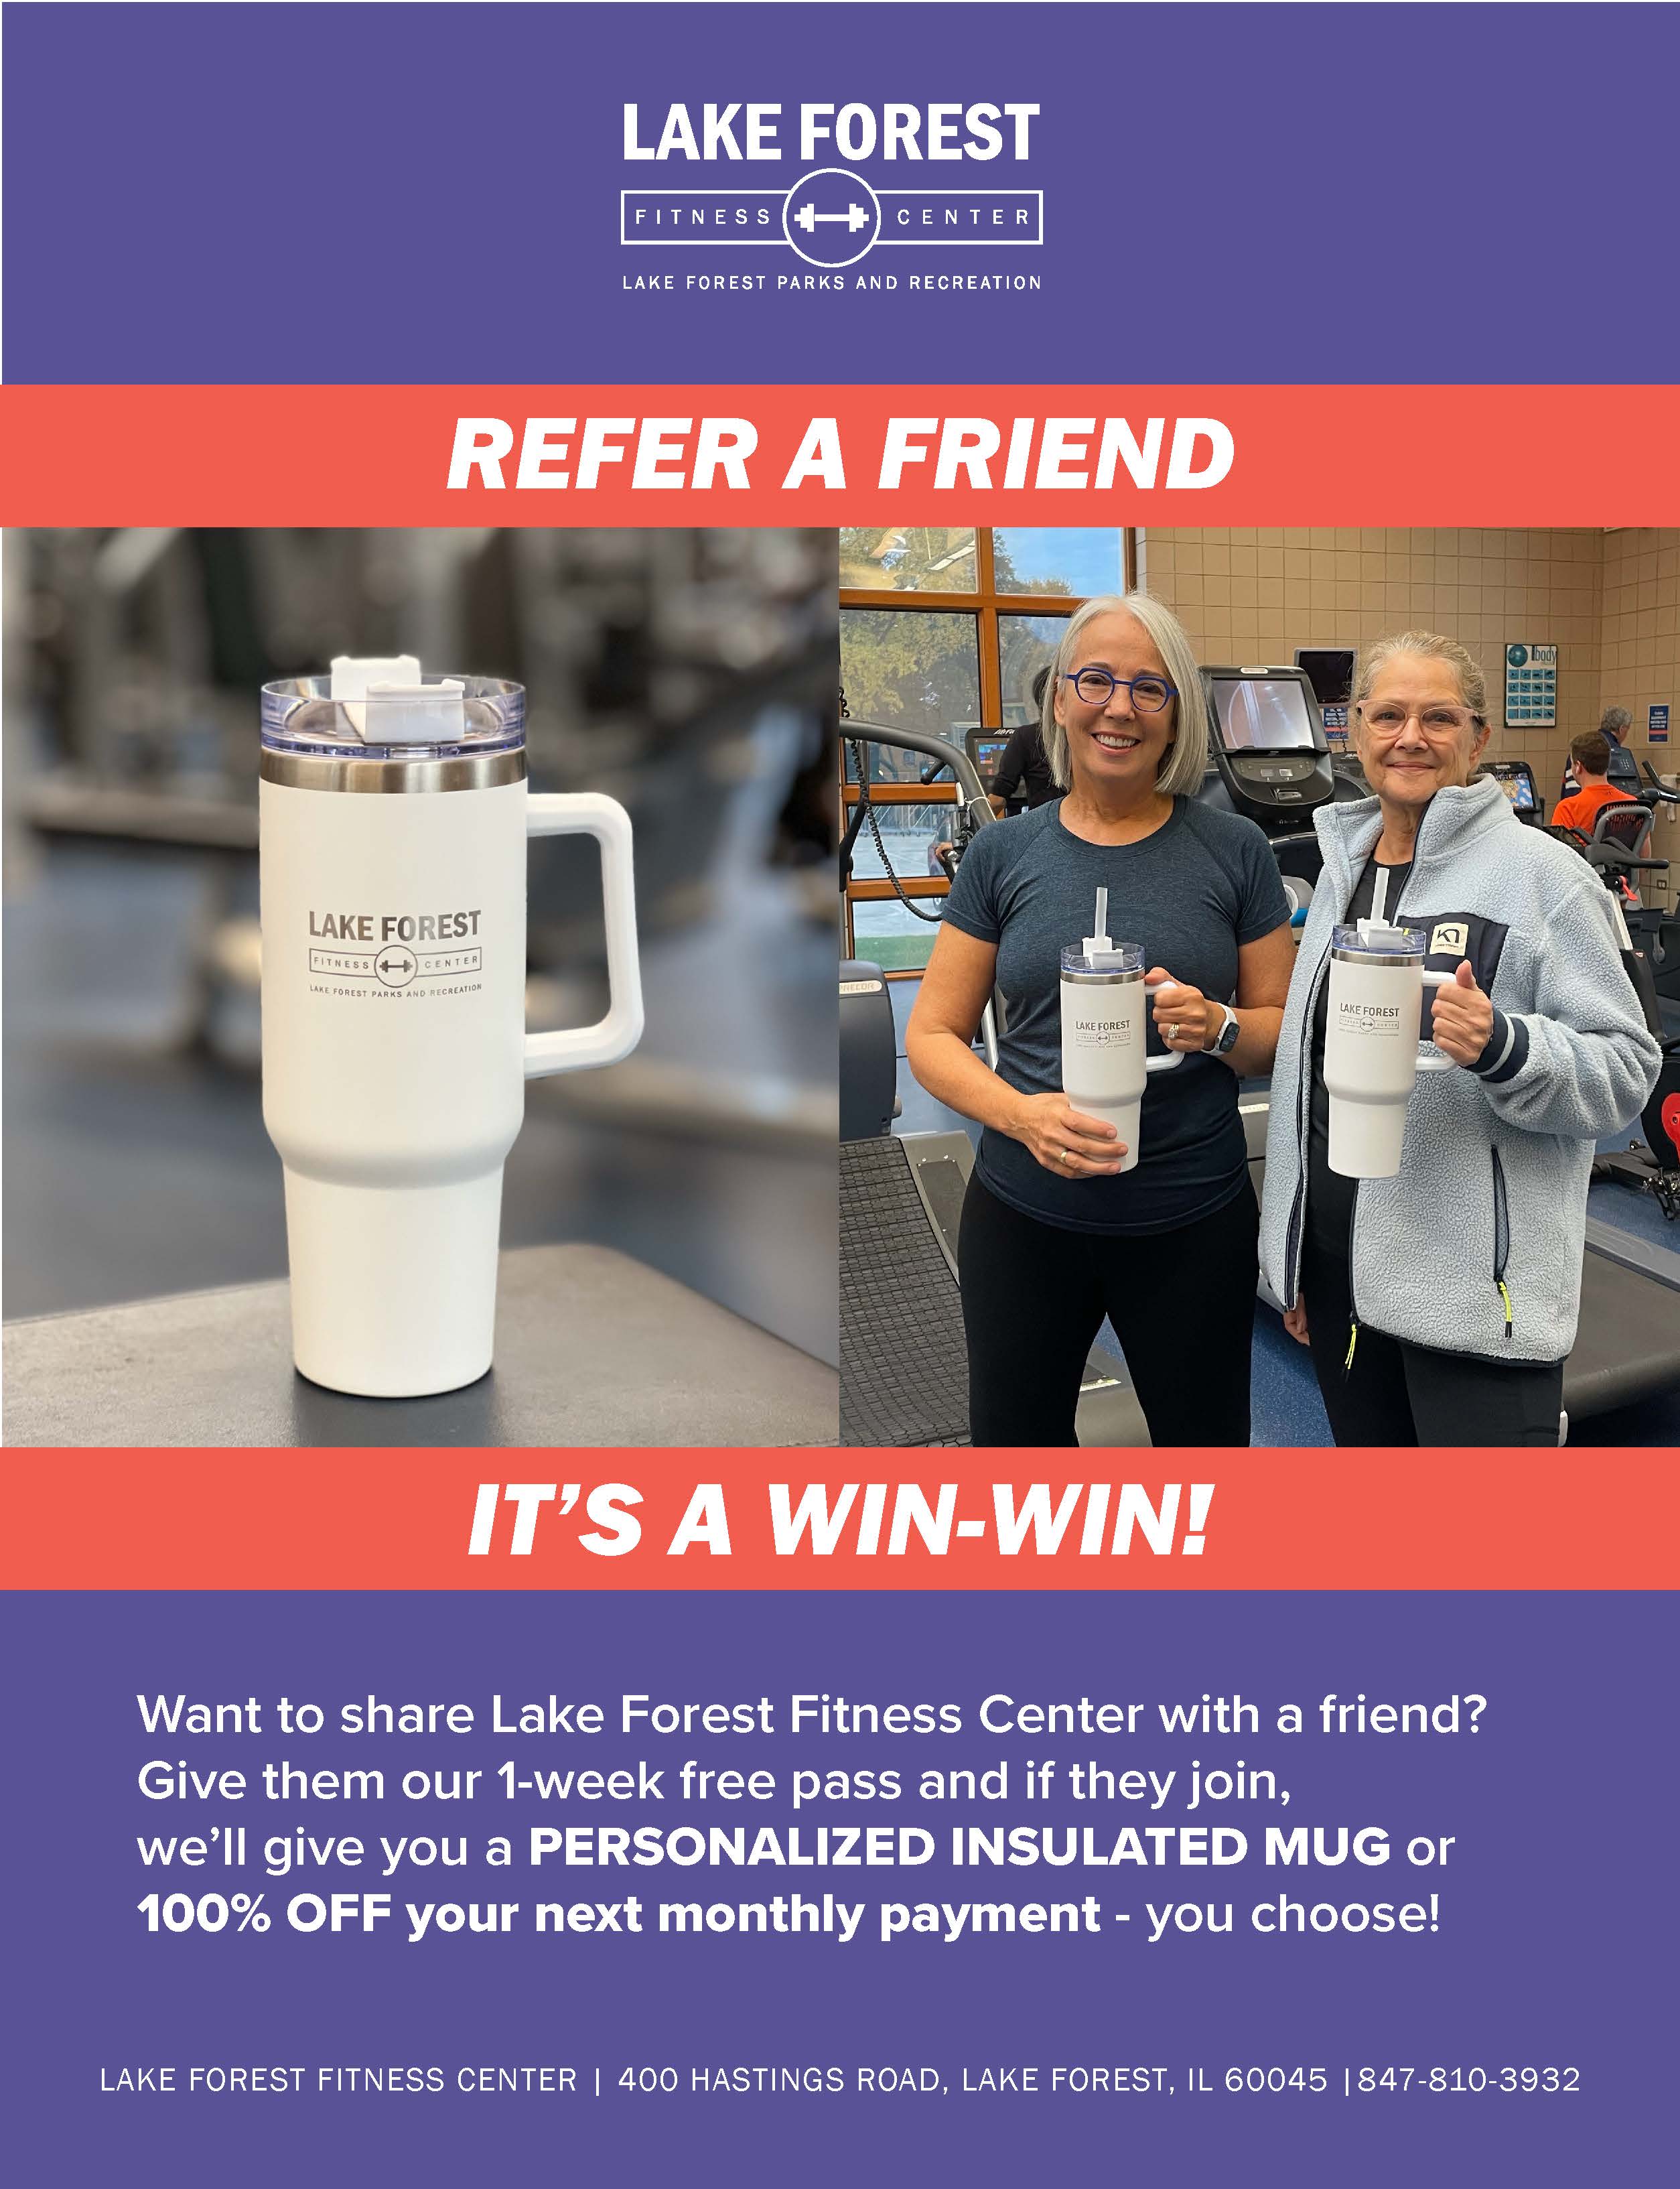 Refer a Friend and win a mug or a free month of membership!